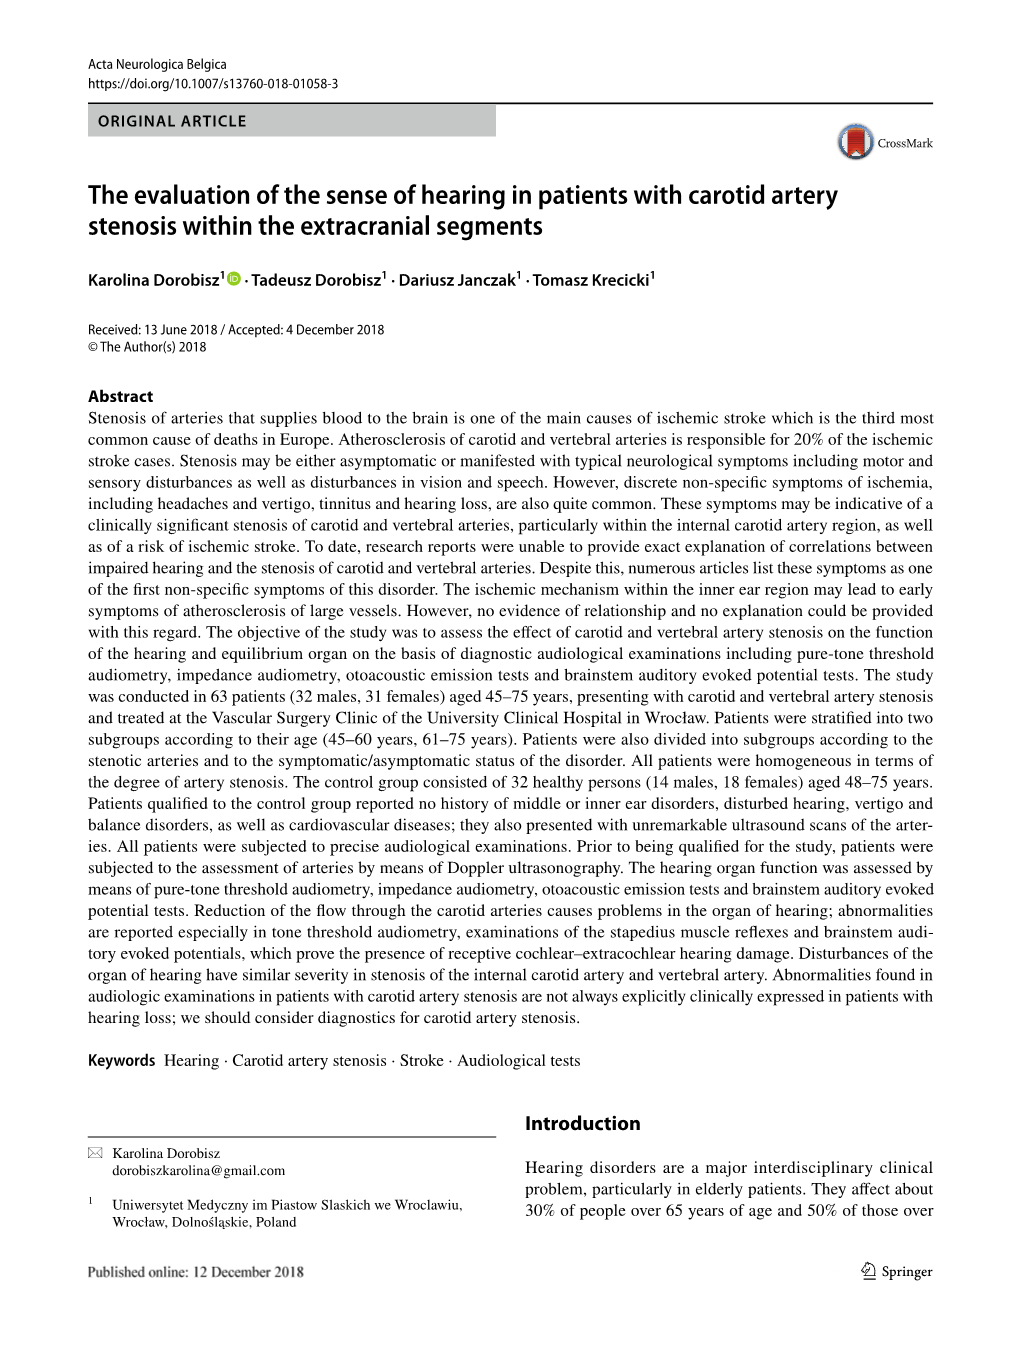 The Evaluation of the Sense of Hearing in Patients with Carotid Artery Stenosis Within the Extracranial Segments